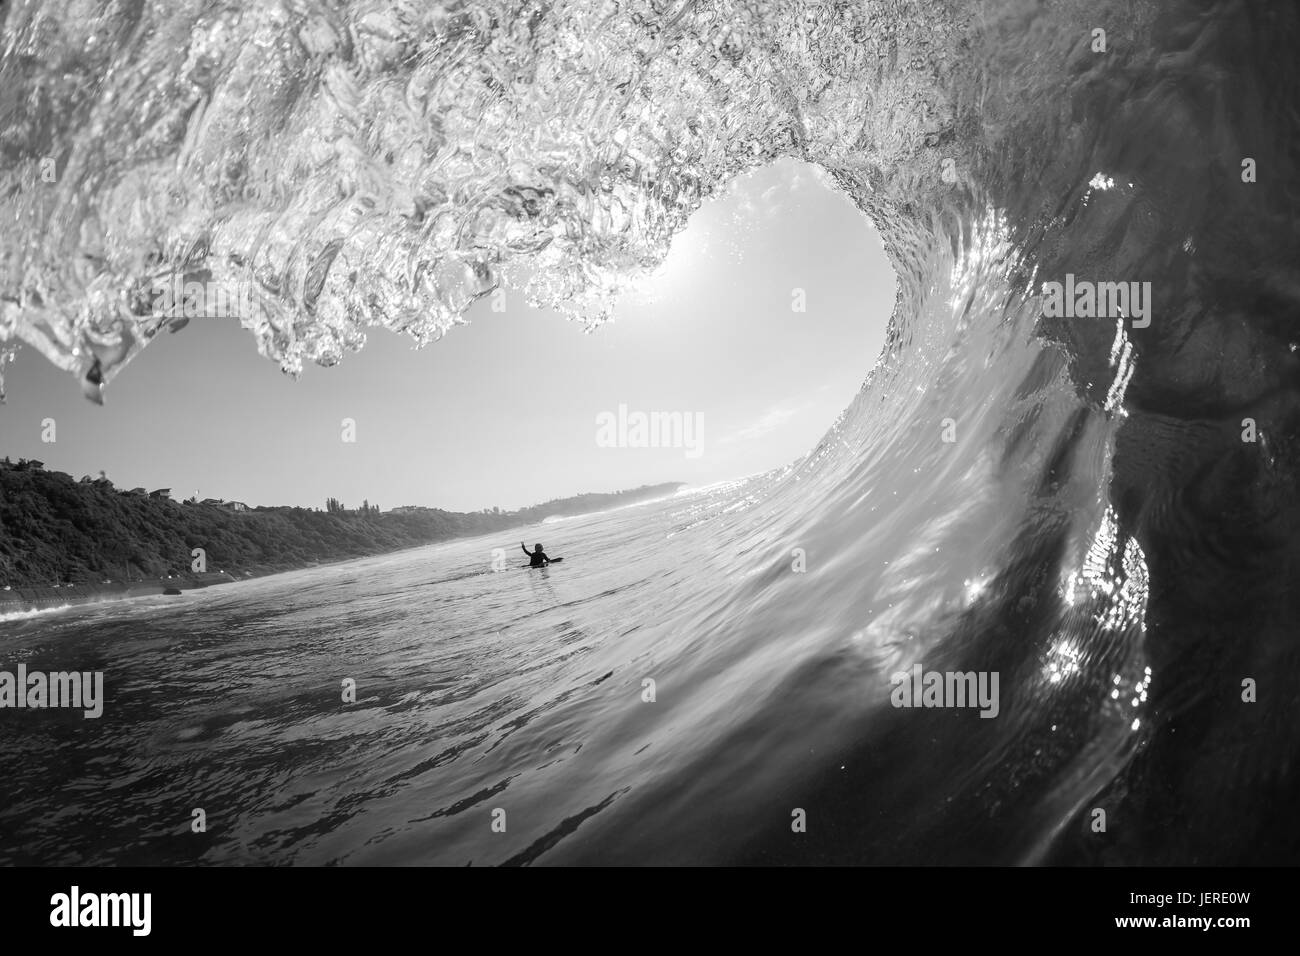 Wave surfer tube ride view swimming inside out water ocean black and white photo Stock Photo